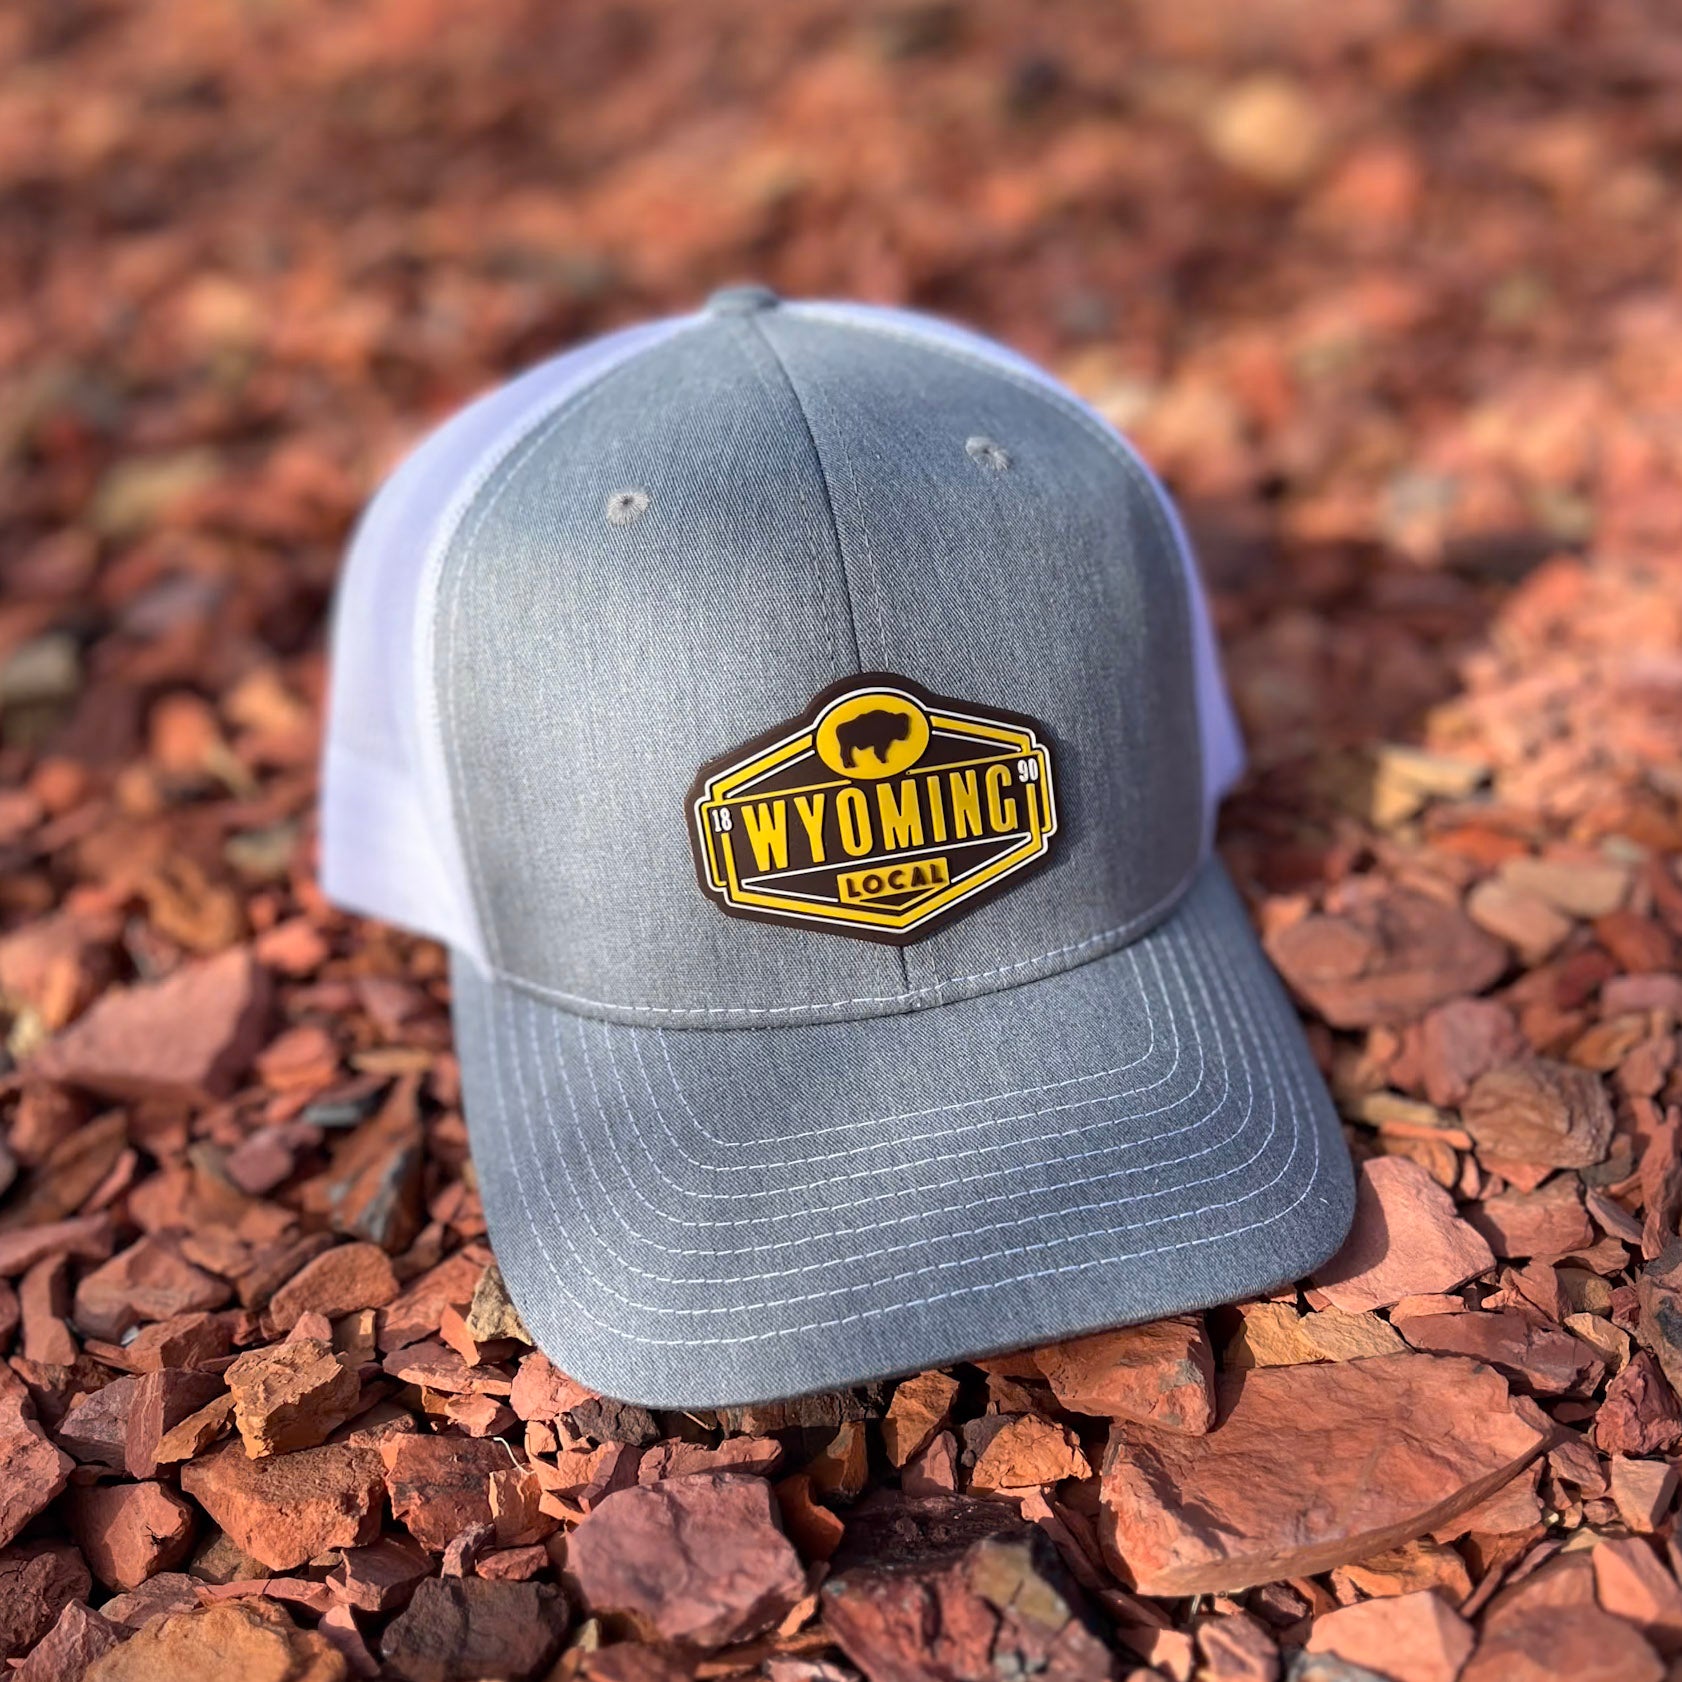 Wyoming pvc patch hat. Wyoming trucker hat. Roam Around Wear is a Wyoming t-shirt company based in Gillette, Wyoming